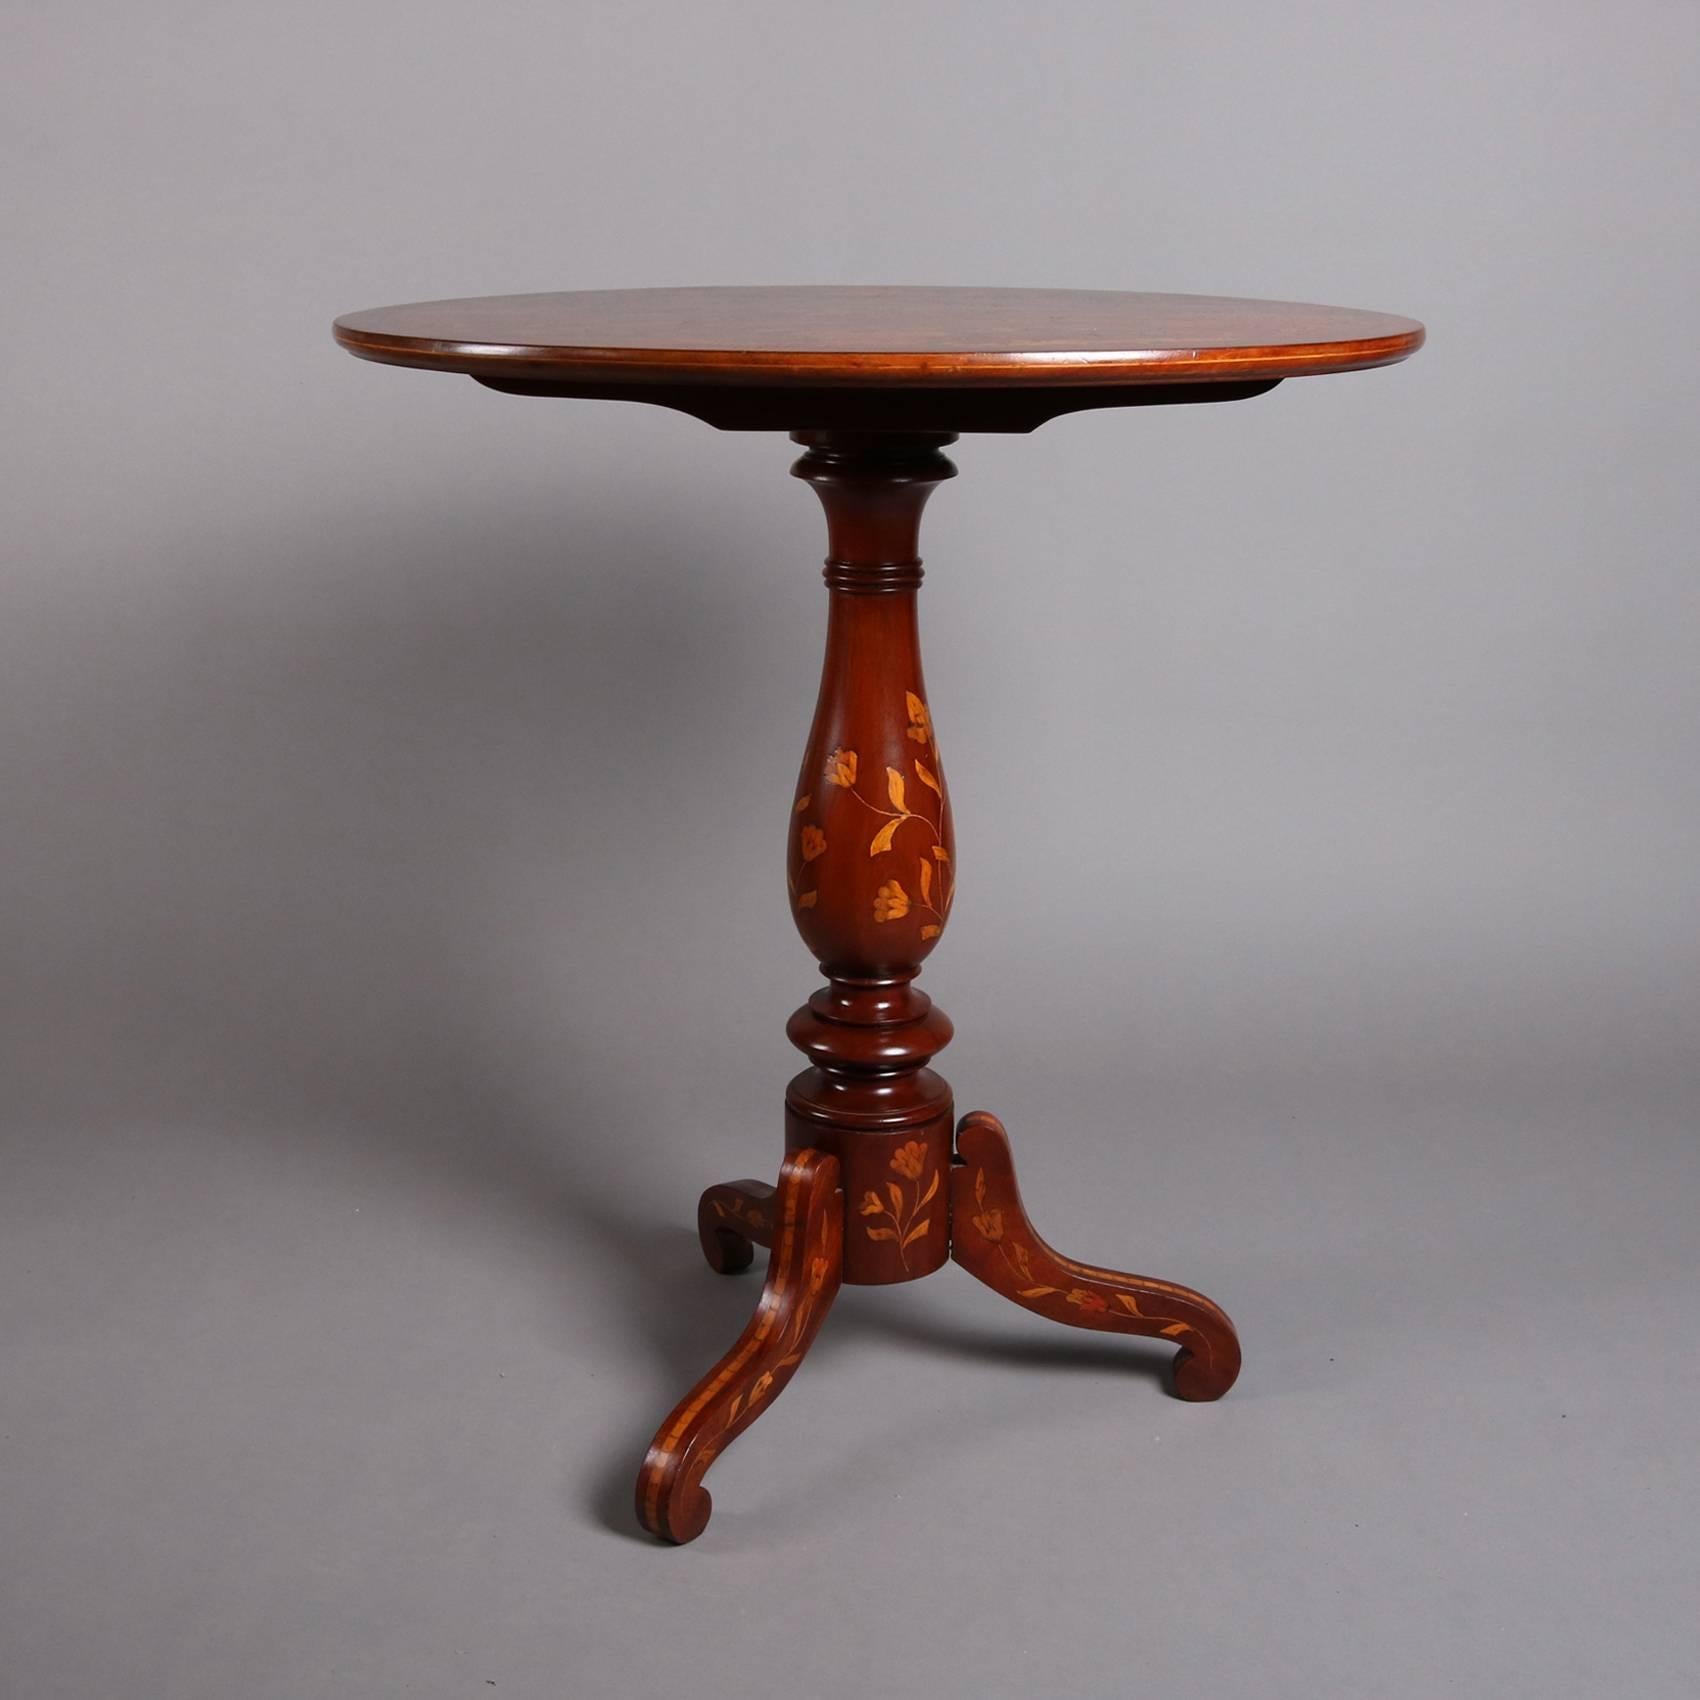 Antique mahogany tilt-top table features satinwood marquetry in floral, foliate and urn design, seated on turned and inlaid pedestal with three legs, 19th century

Measures: 31